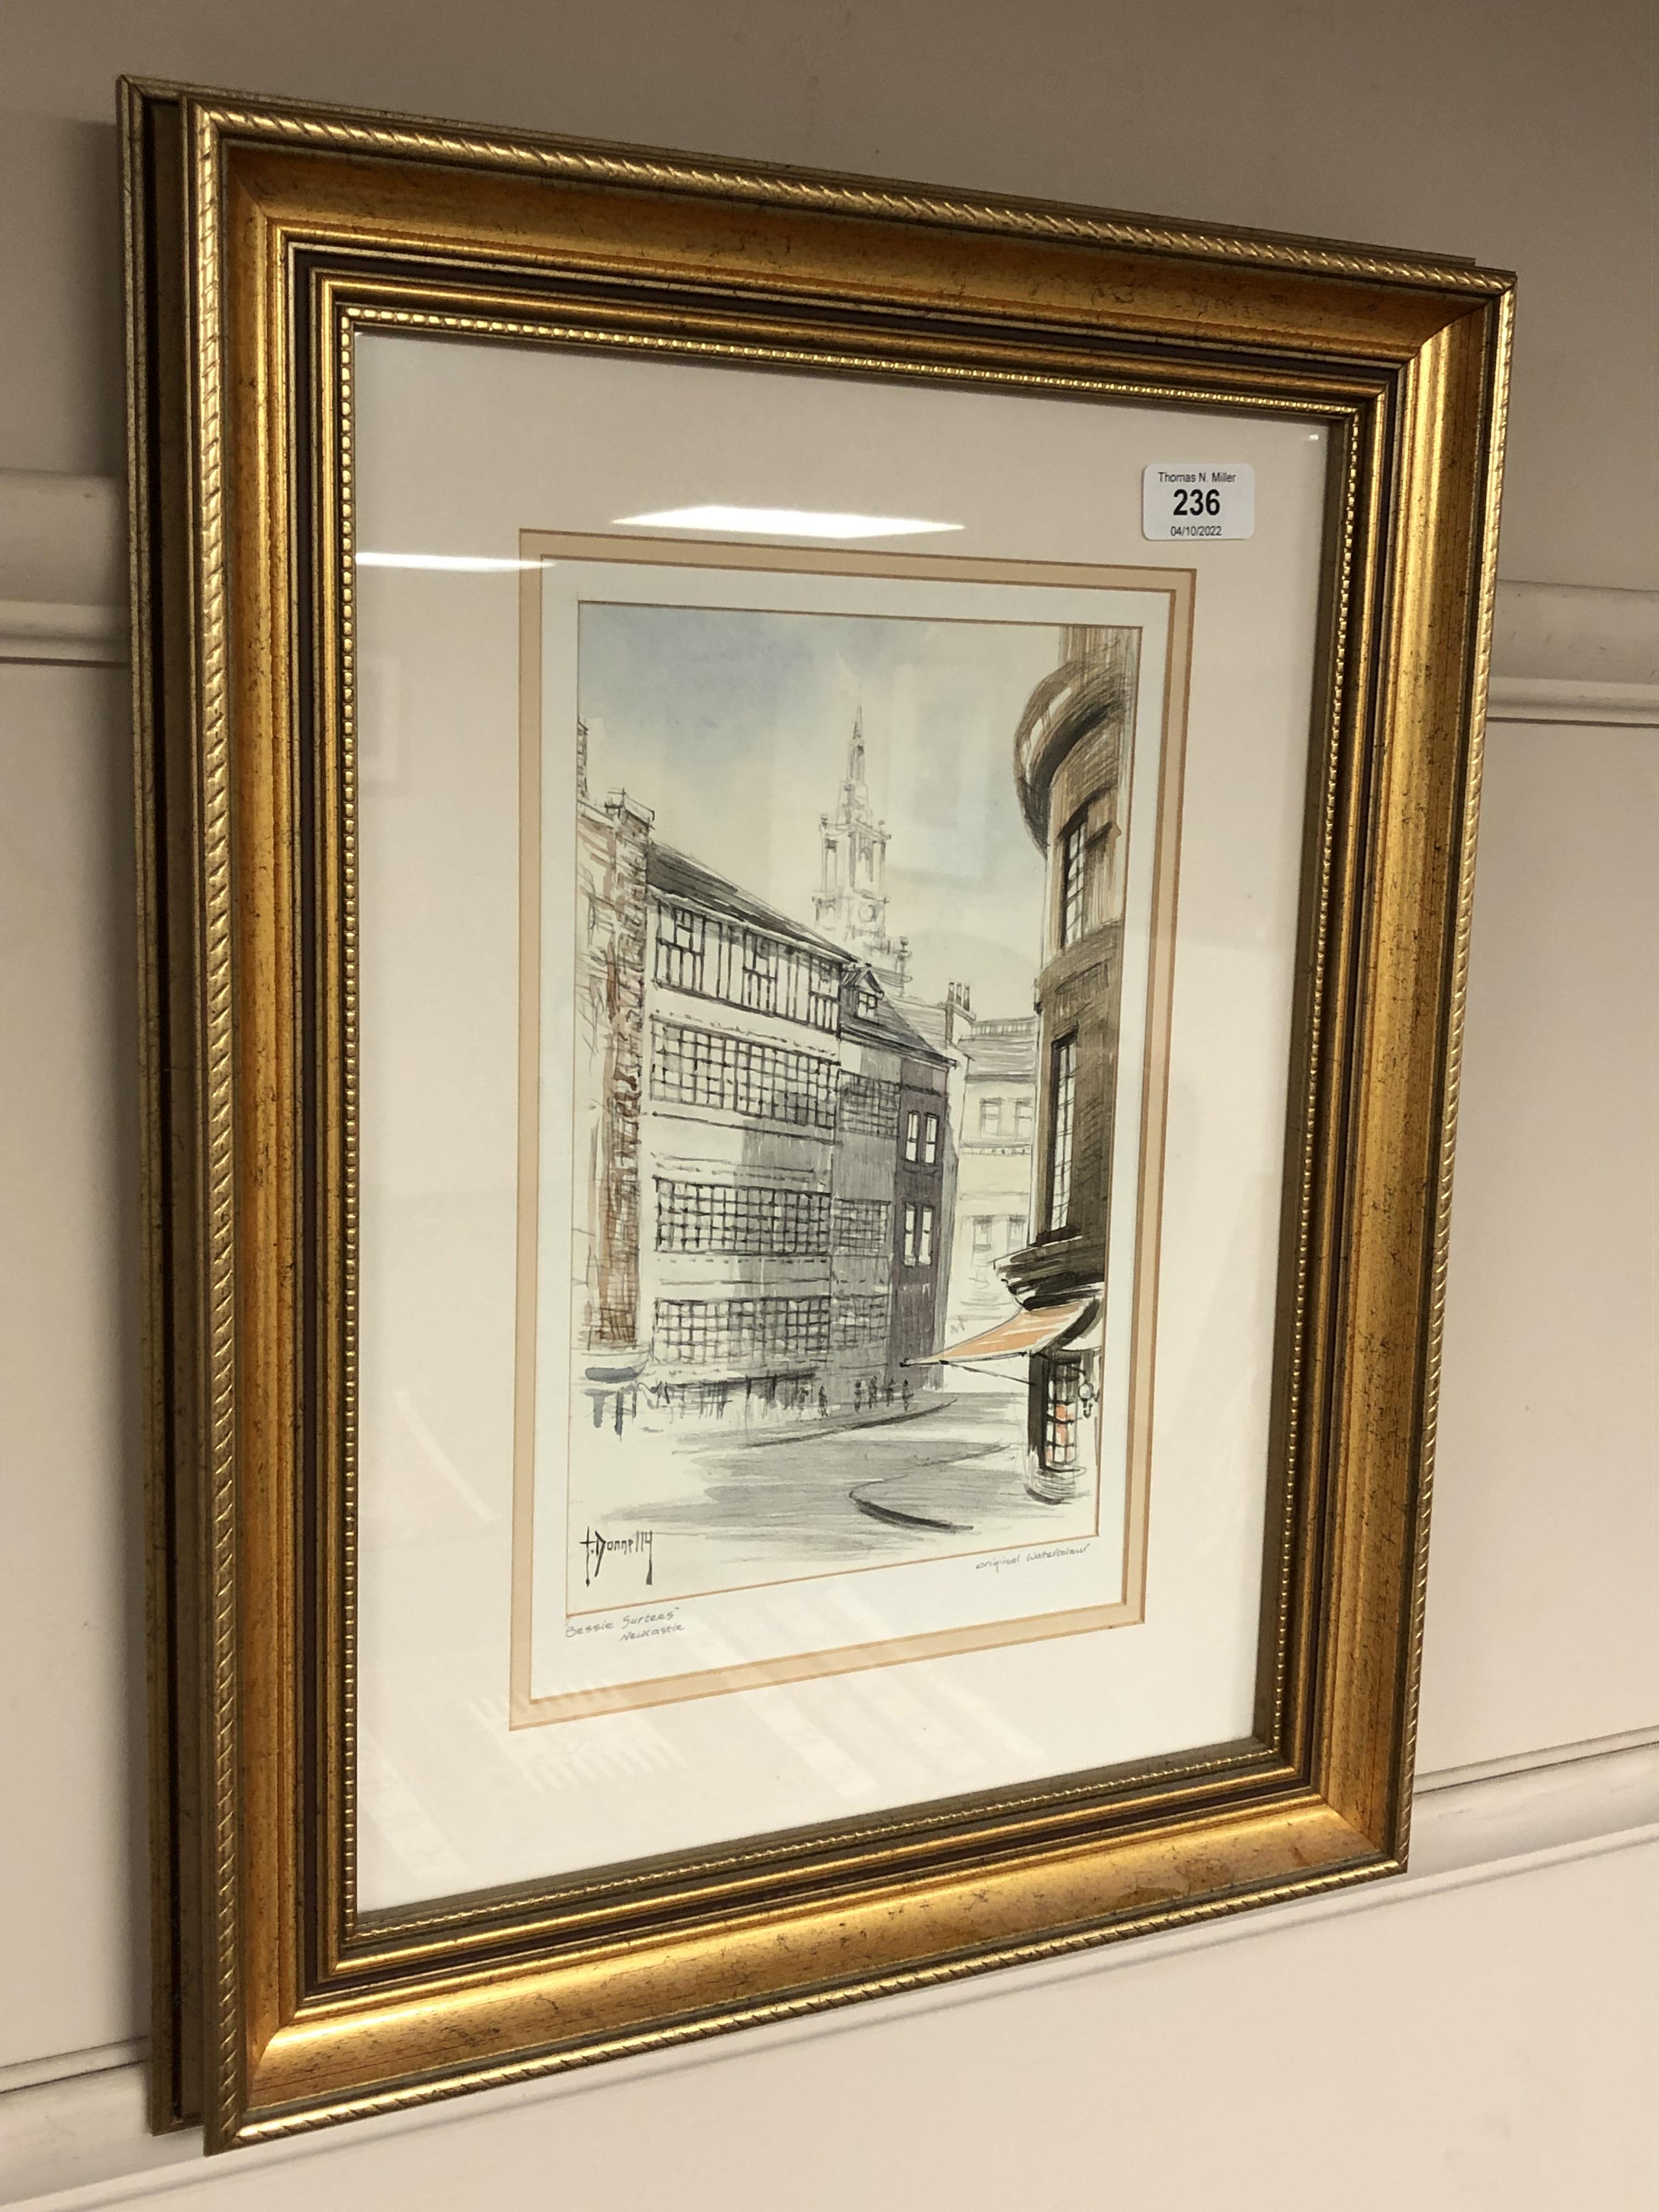 Terry Donnelly : Bessie Surtees, Newcastle upon Tyne, watercolour, 17 cm x 27 cm, signed, framed.